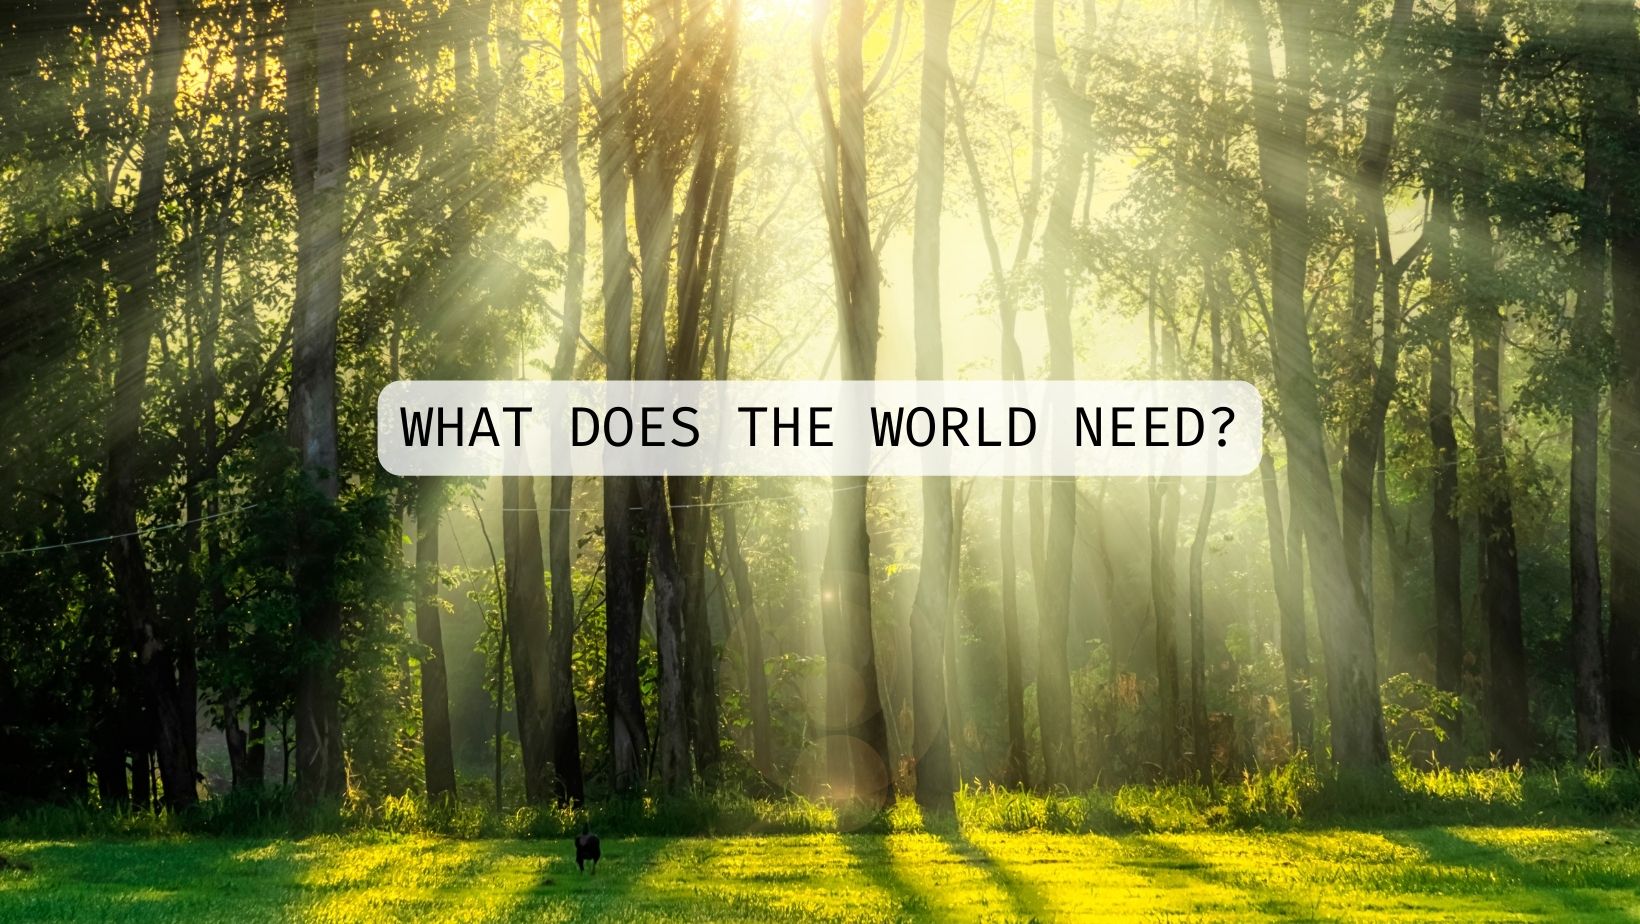 What does the world need?